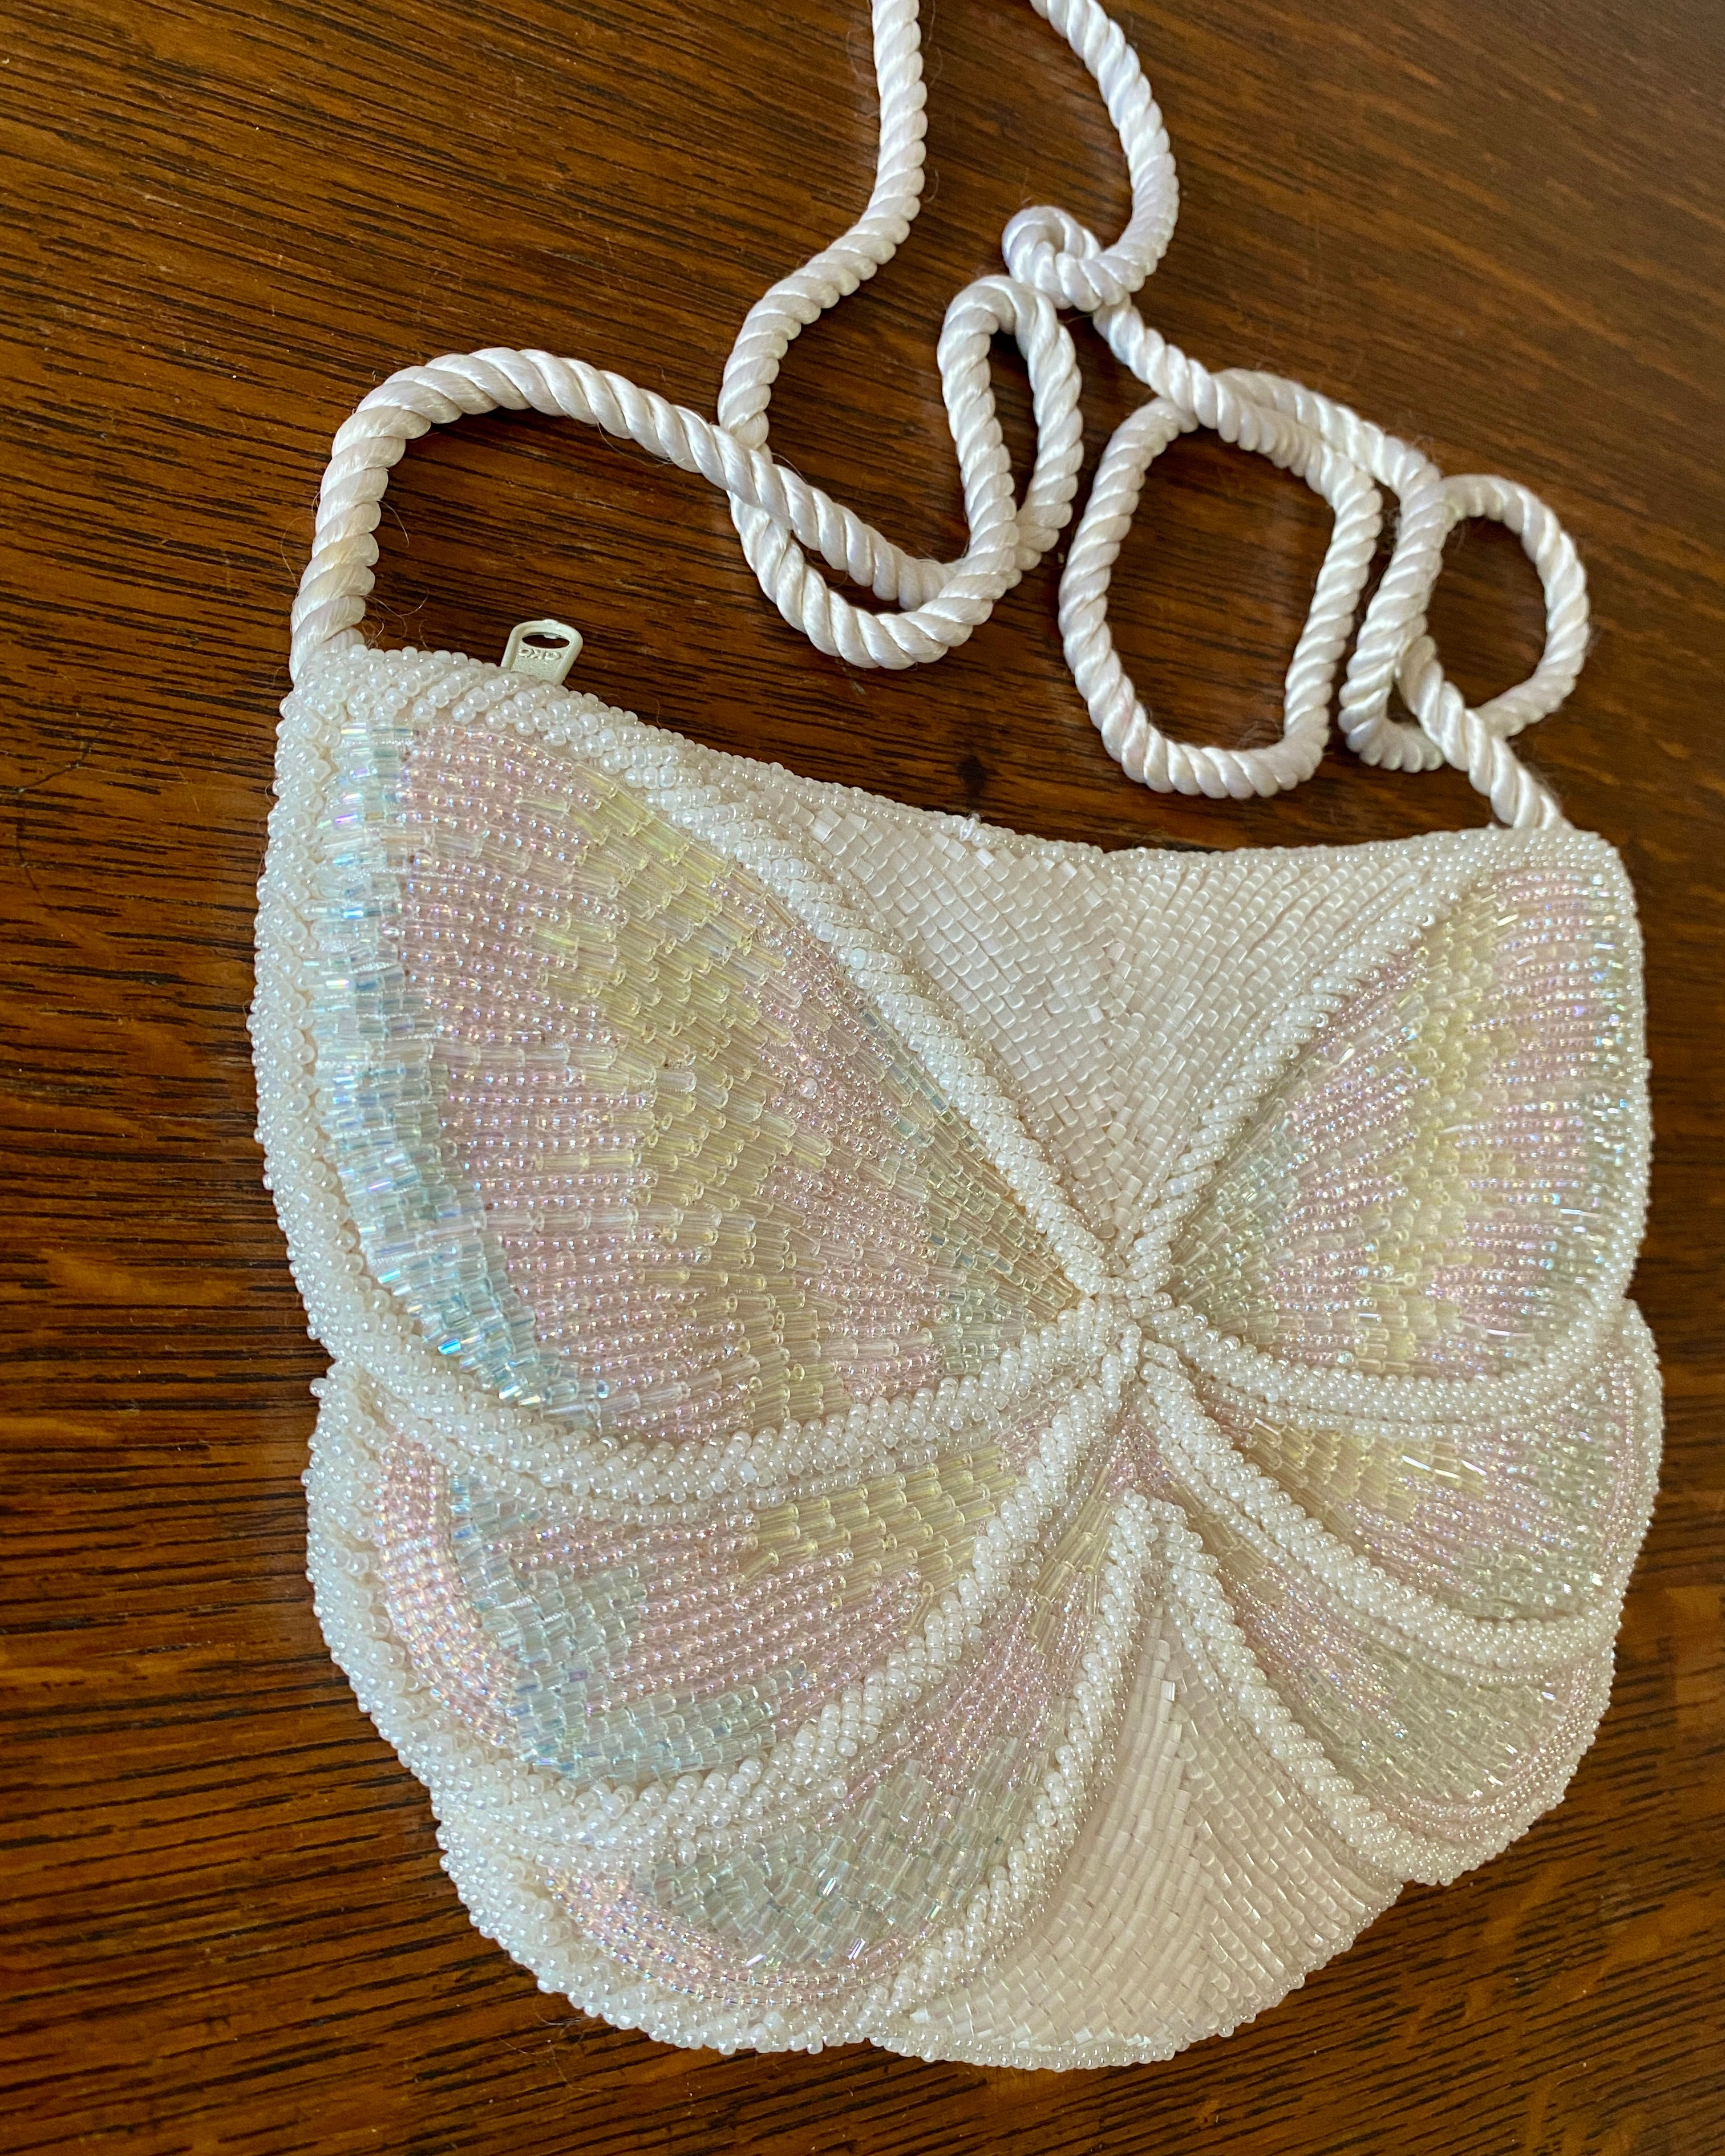 Vintage 1980s White Butterfly Iridescent Beaded Bag Purse with Top Strap